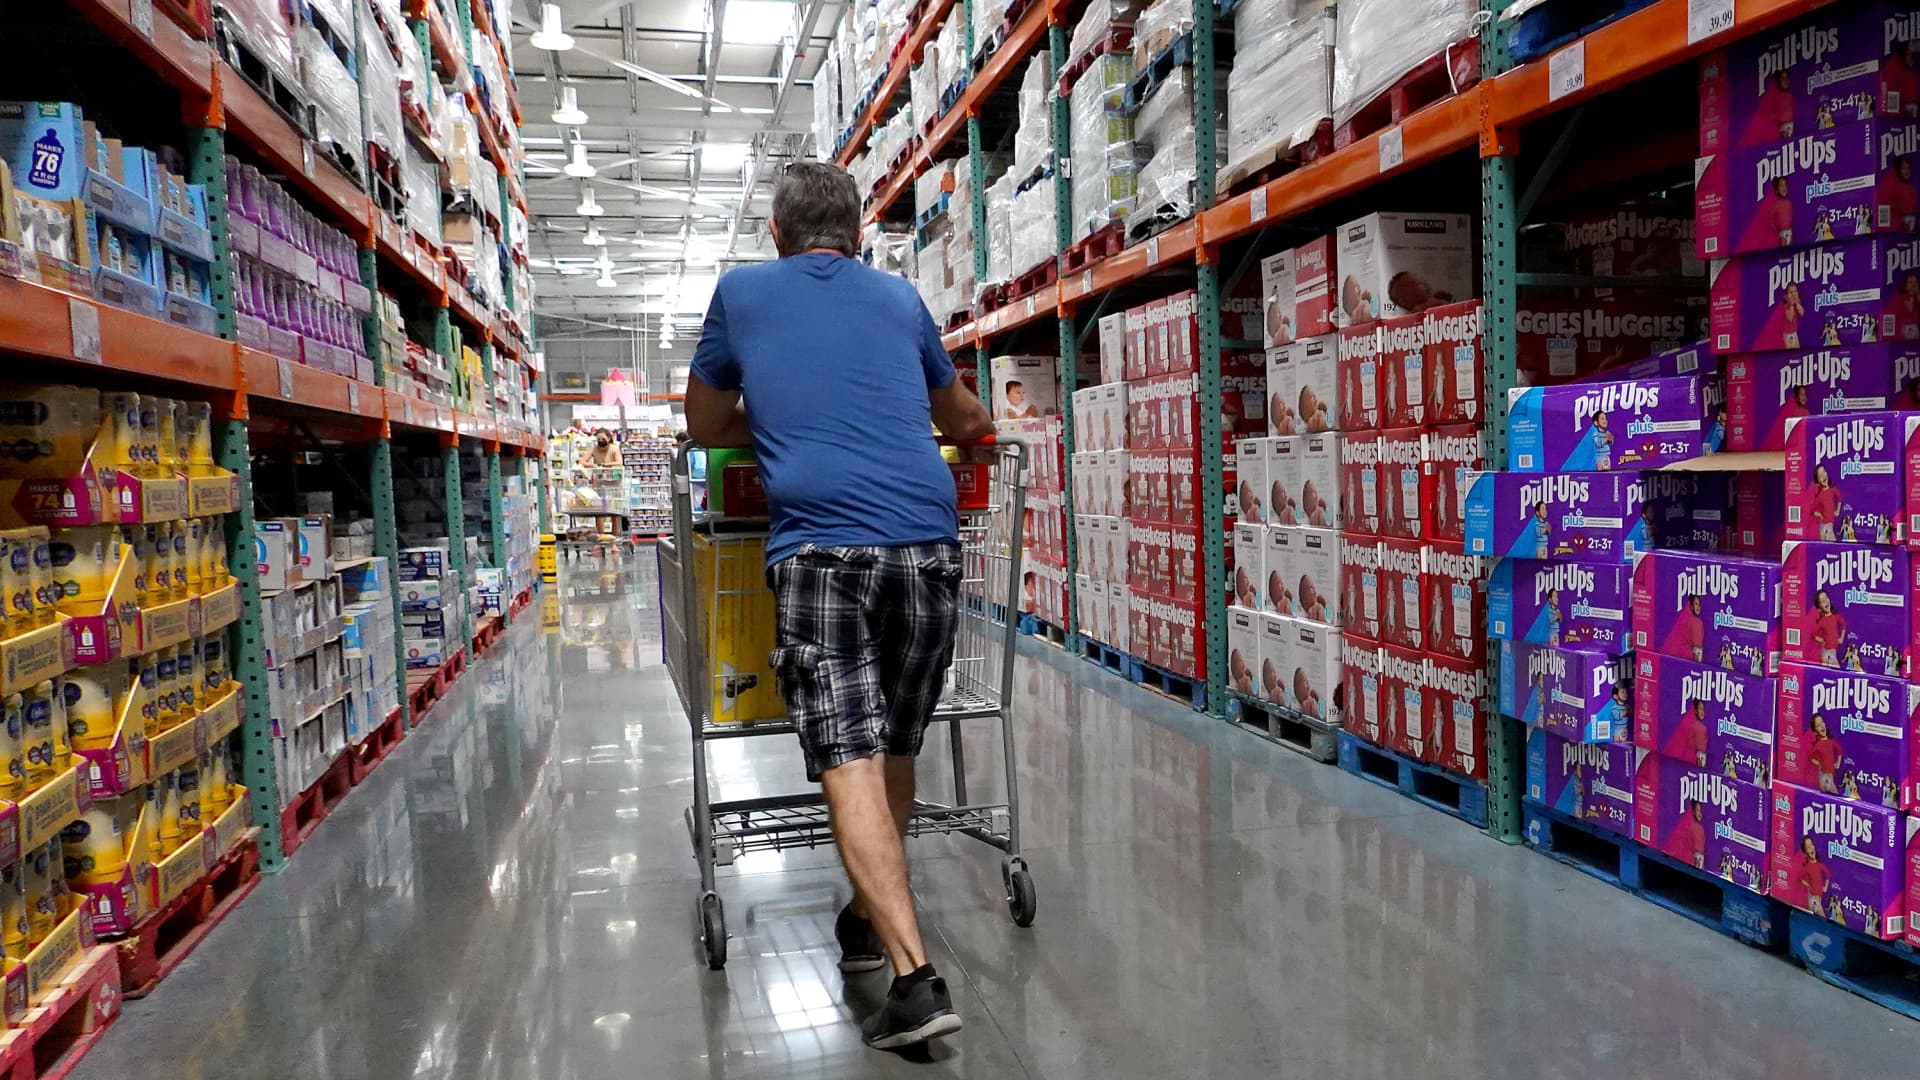 Skip these 5 household items at Costco—they aren't worth the bargain, says expert at finding deals